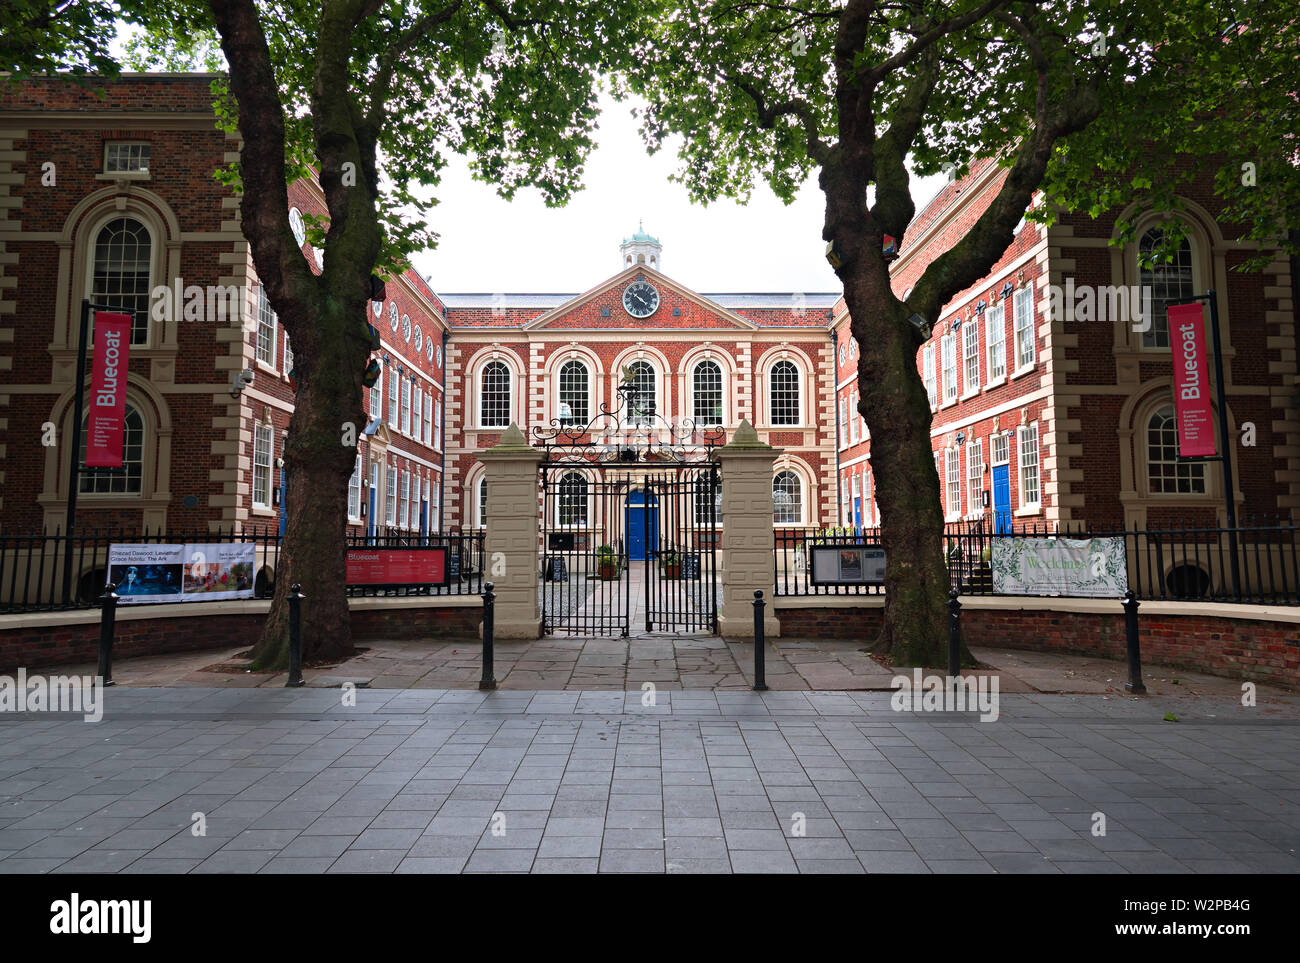 Exterior of Bluecoat Chambers in School Lane Liverpool, built in 1716-17 as a charity school, is the oldest surviving building in central Liverpool. Stock Photo